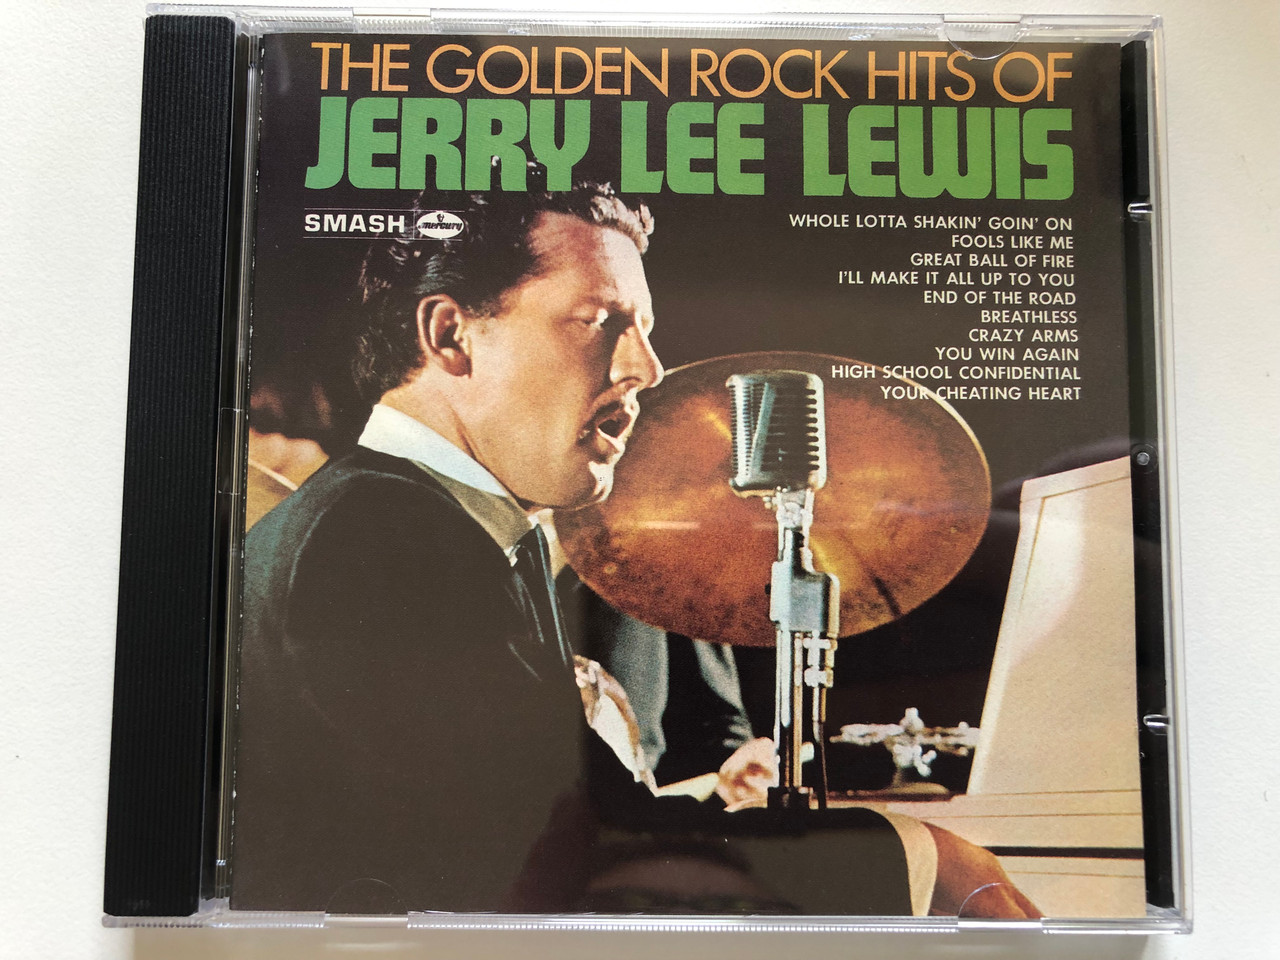 https://cdn10.bigcommerce.com/s-62bdpkt7pb/products/0/images/227545/The_Golden_Rock_Hits_Of_Jerry_Lee_Lewis_Whole_Lotta_Shakin_Goin_On_Fools_Like_Me_Great_Balls_Of_Fire_Ill_Make_It_All_Up_To_You_End_Of_The_Road_Breathless_Crazy_Arms_You_Win_Again_1__68574.1652433242.1280.1280.JPG?c=2&_gl=1*f62hef*_ga*MjA2NTIxMjE2MC4xNTkwNTEyNTMy*_ga_WS2VZYPC6G*MTY1MjQzMDAwNS4zOTYuMS4xNjUyNDMzMDAwLjU1